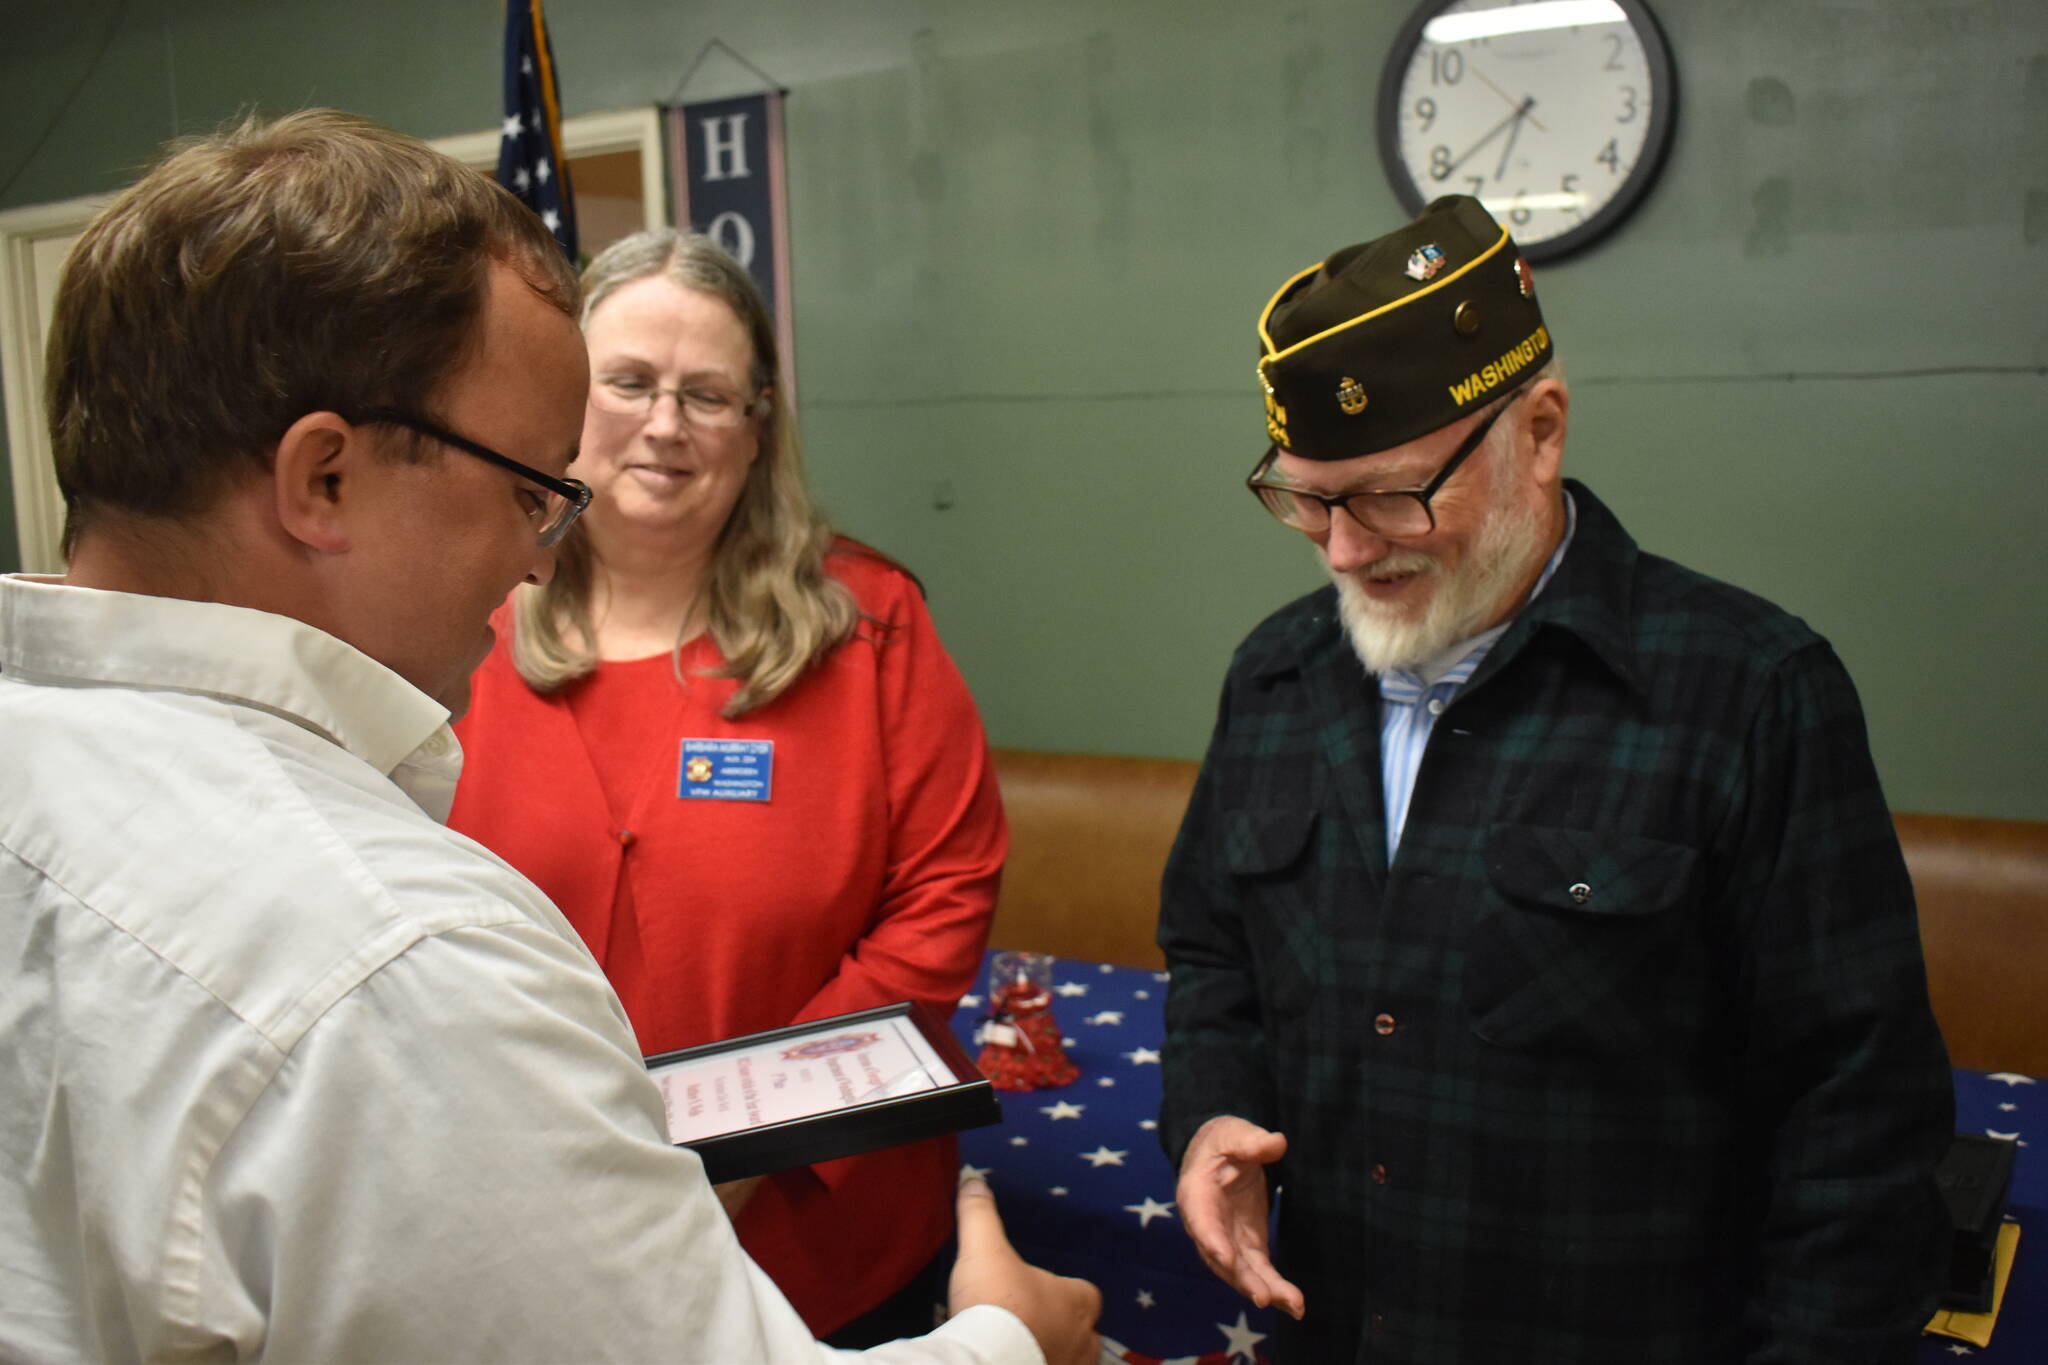 Clayton Franke / The Daily World
The Daily World reporter Matthew N. Wells receives a VFW Publications Contest award on Sept. 5.